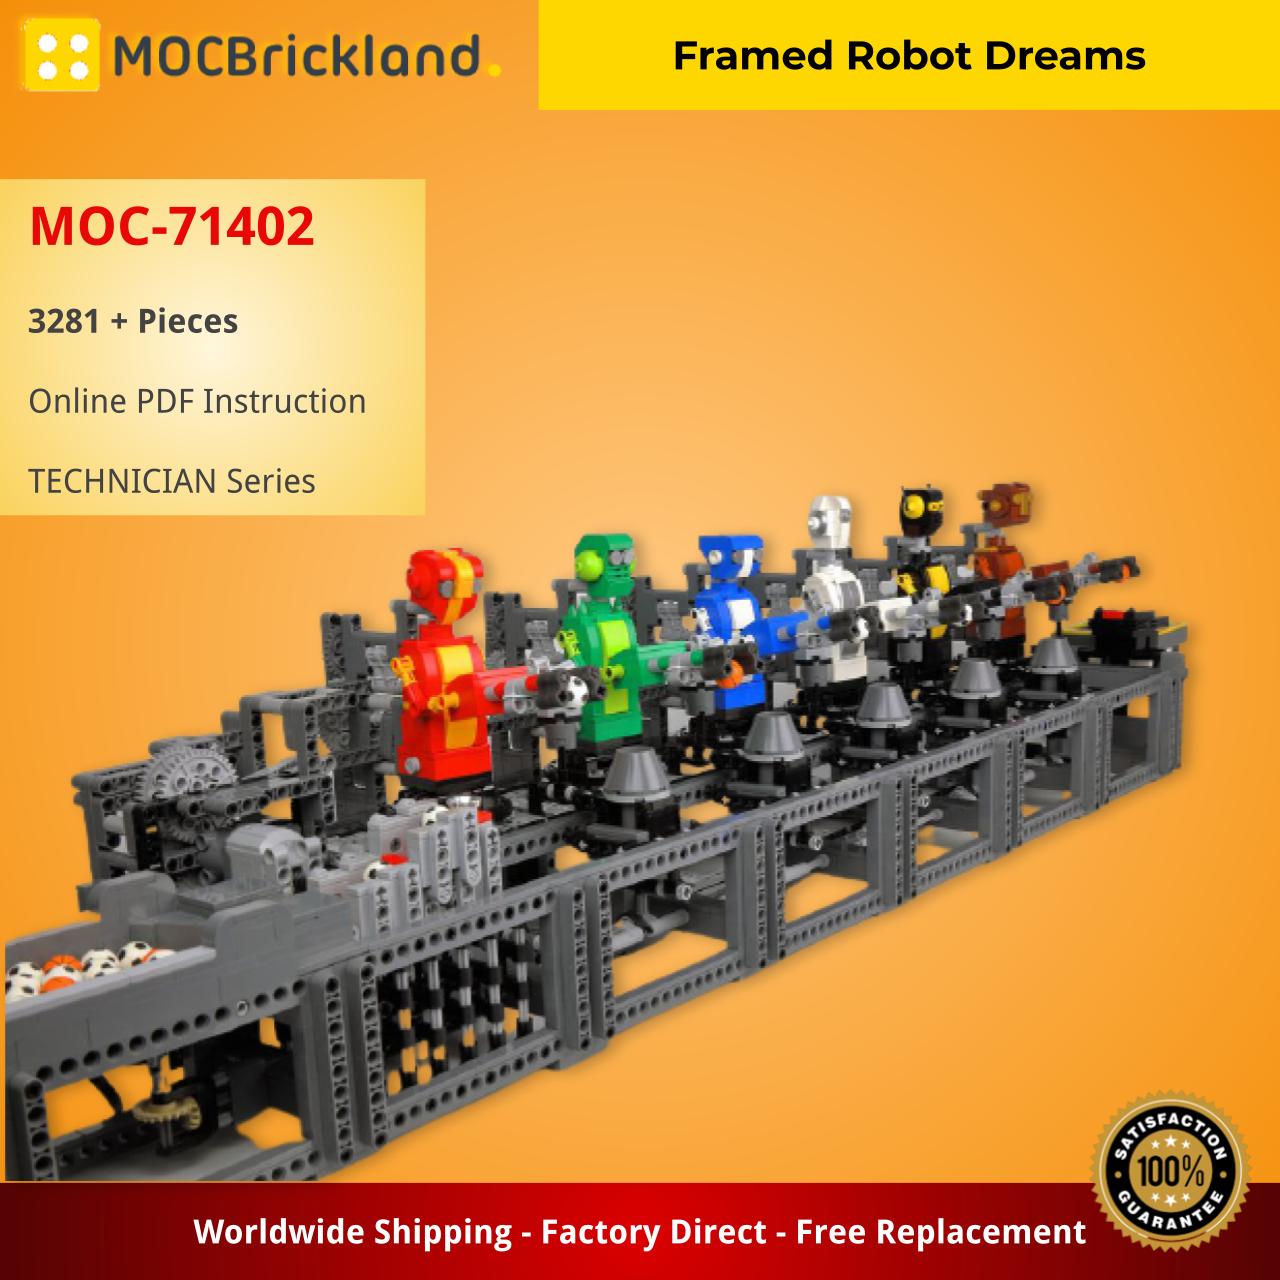 Framed Robot Dreams TECHNICIAN MOC-71402 by BrickPolis with 3281 pieces